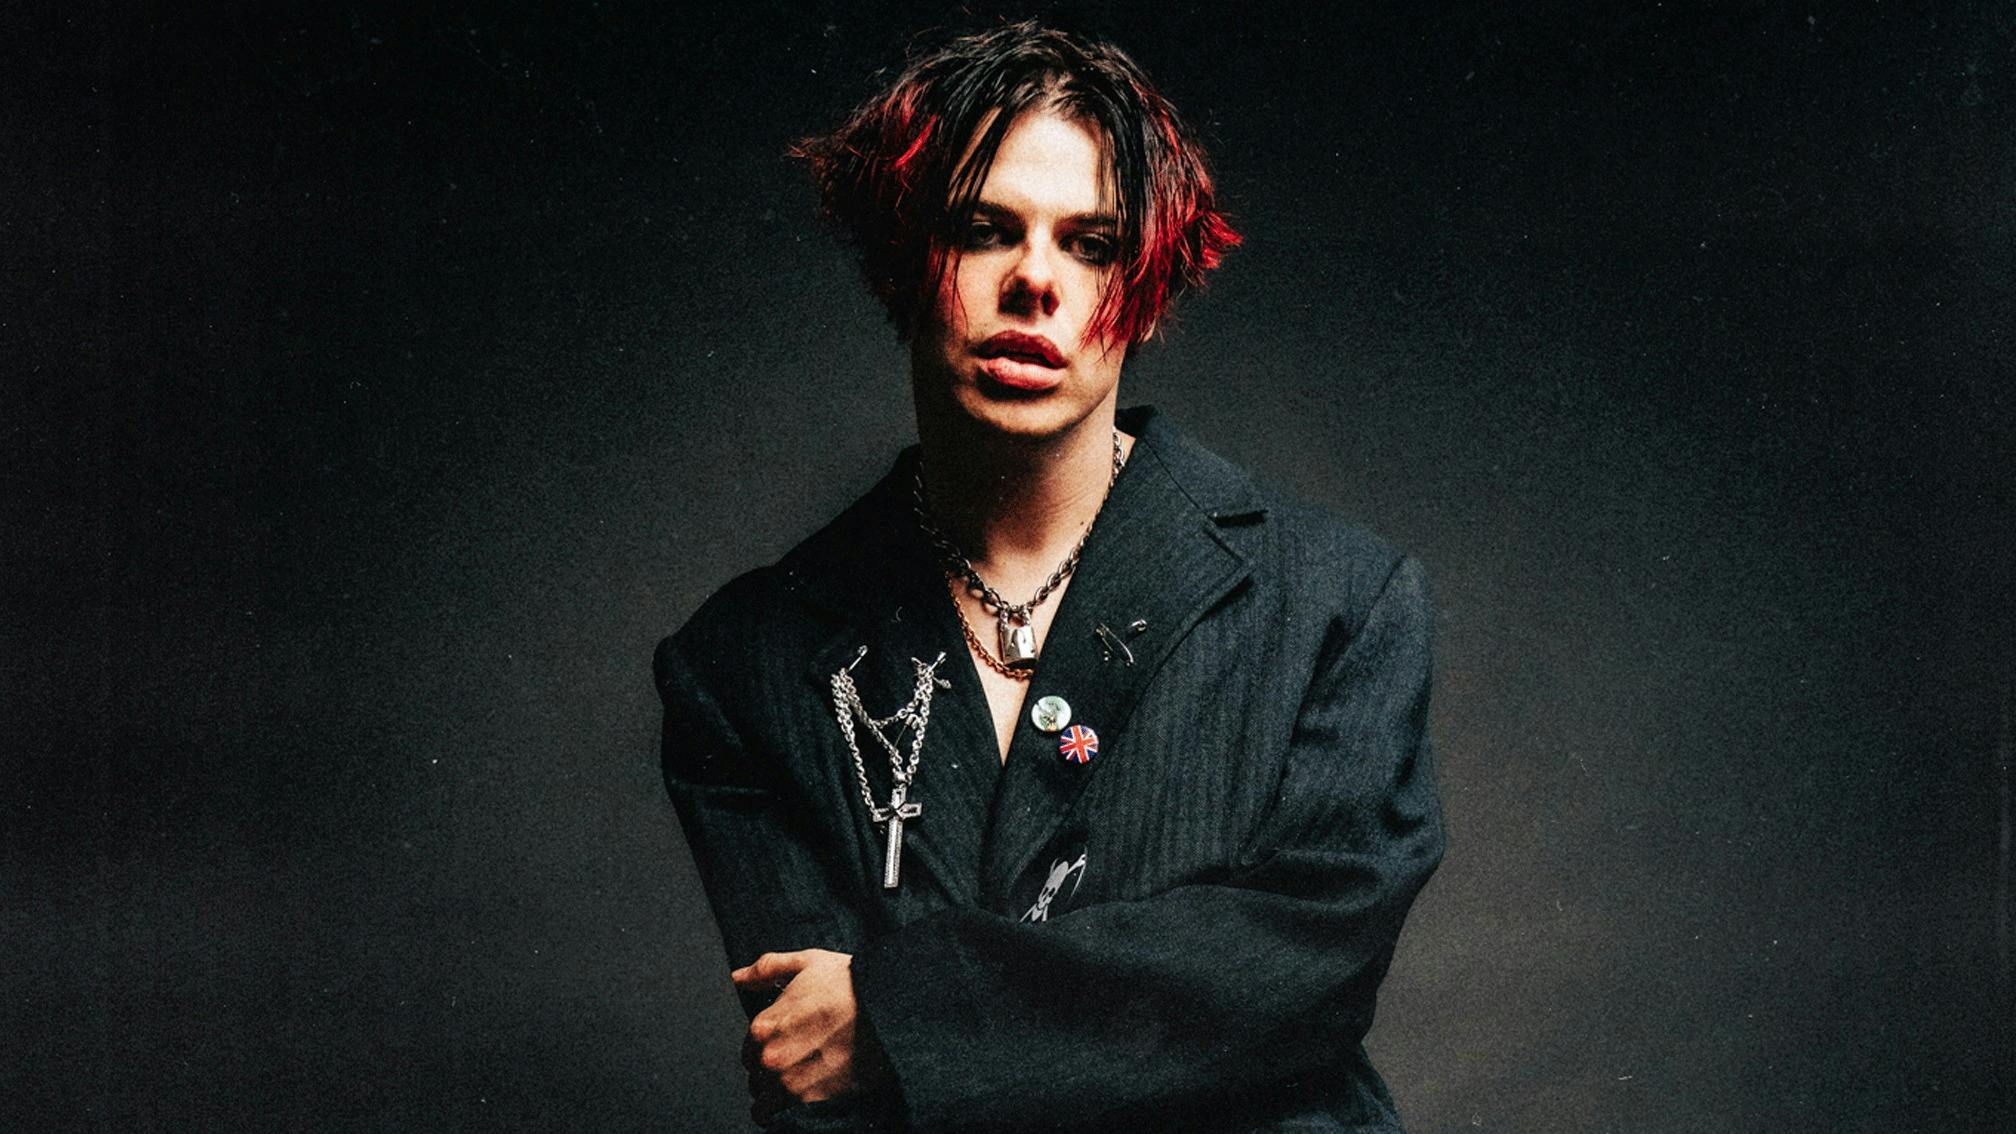 YUNGBLUD announces upcoming self-titled album